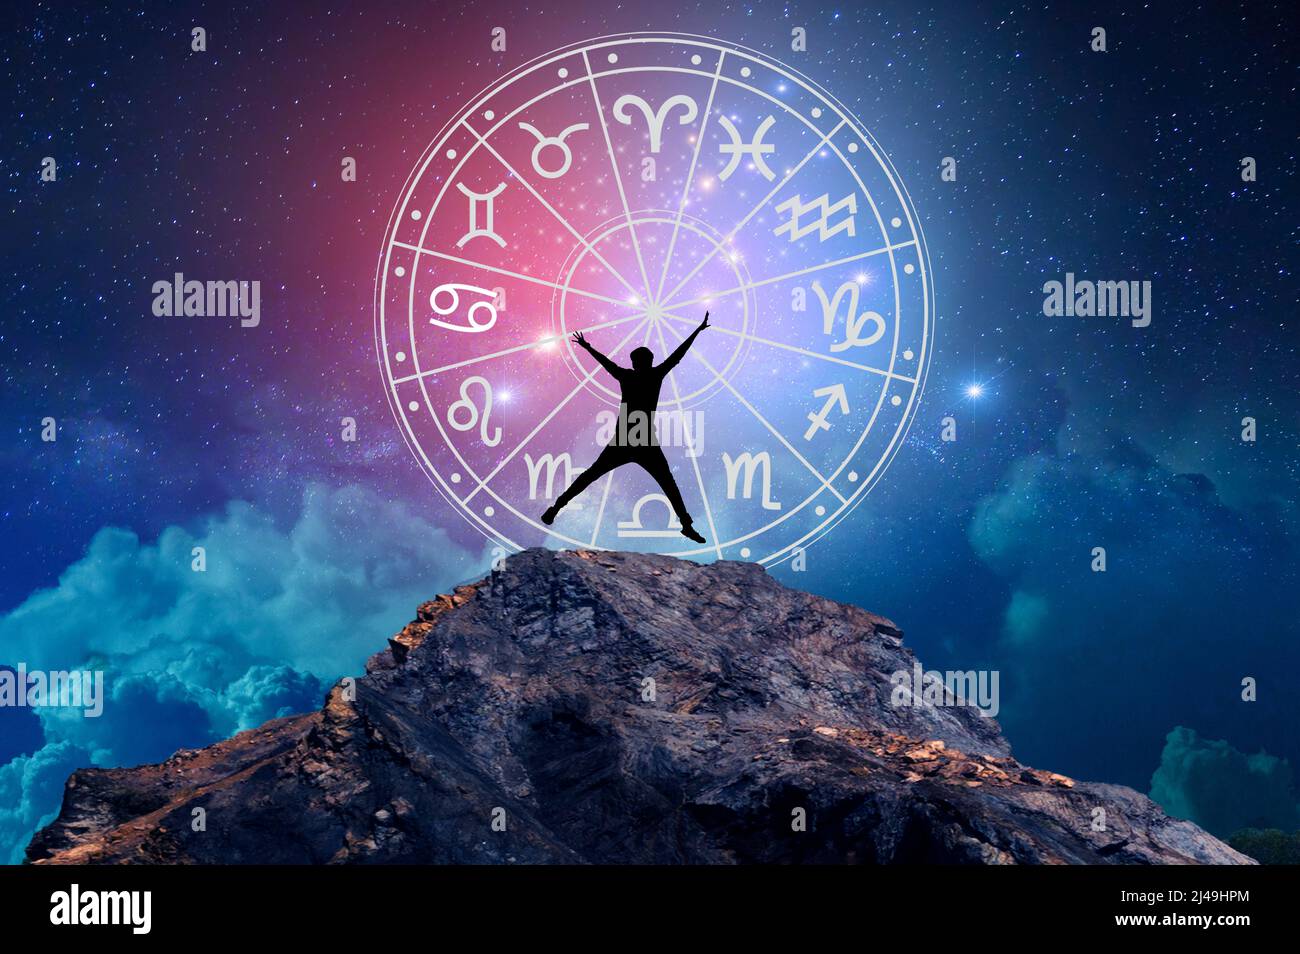 Zodiac signs inside of horoscope circle. Astrology in the sky with many stars and moons  astrology and horoscopes concept Stock Photo